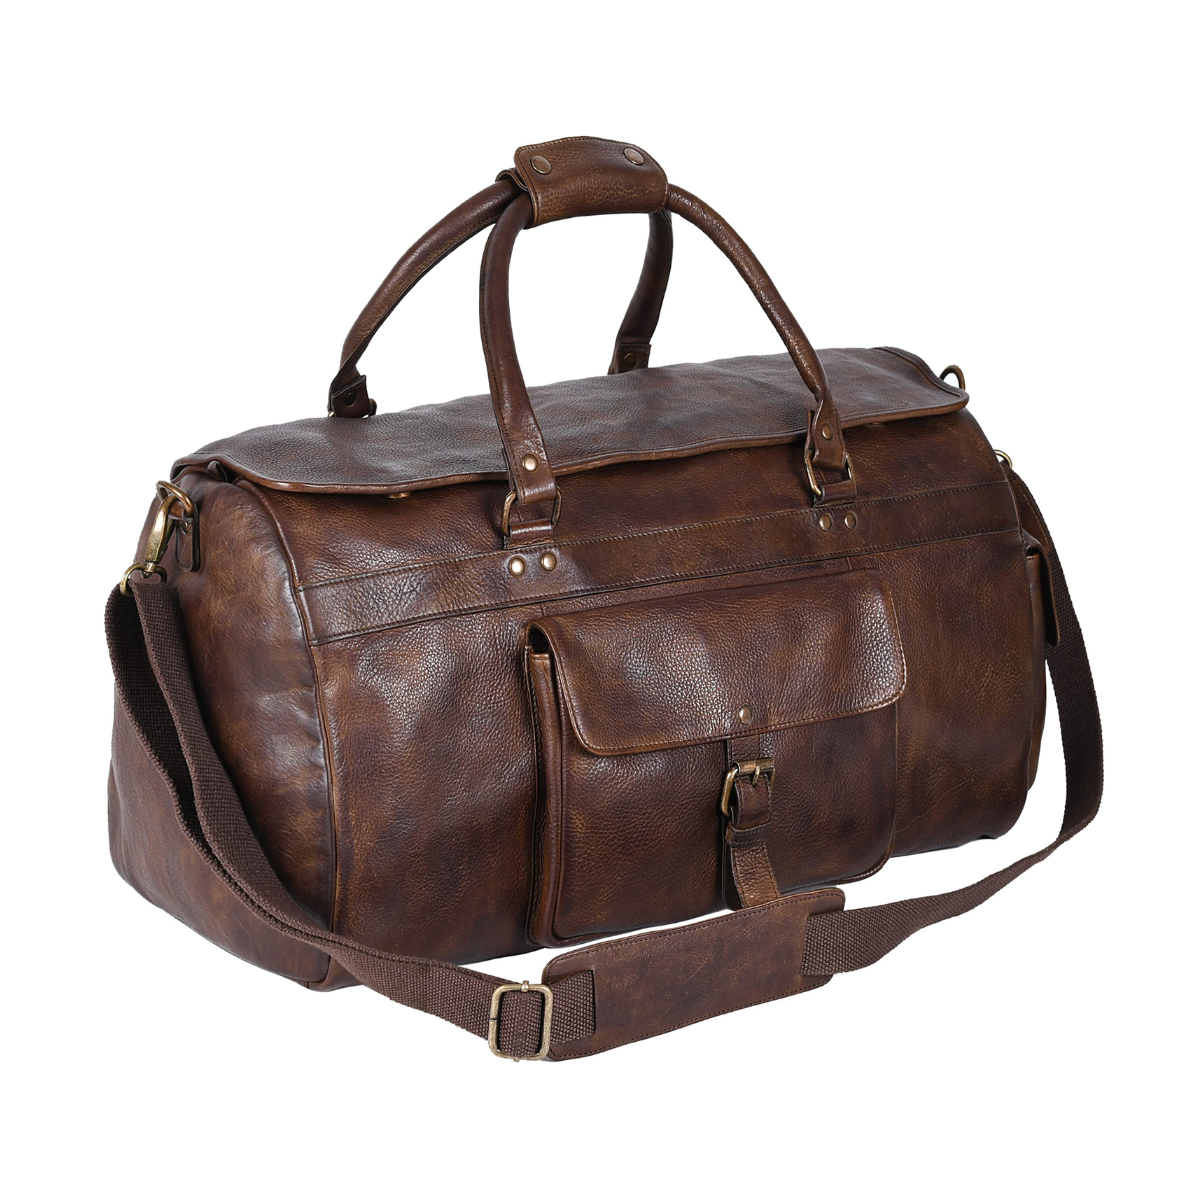 8. Stylish Travel Duffel Bag: The Perfect Anniversary Gift for Him